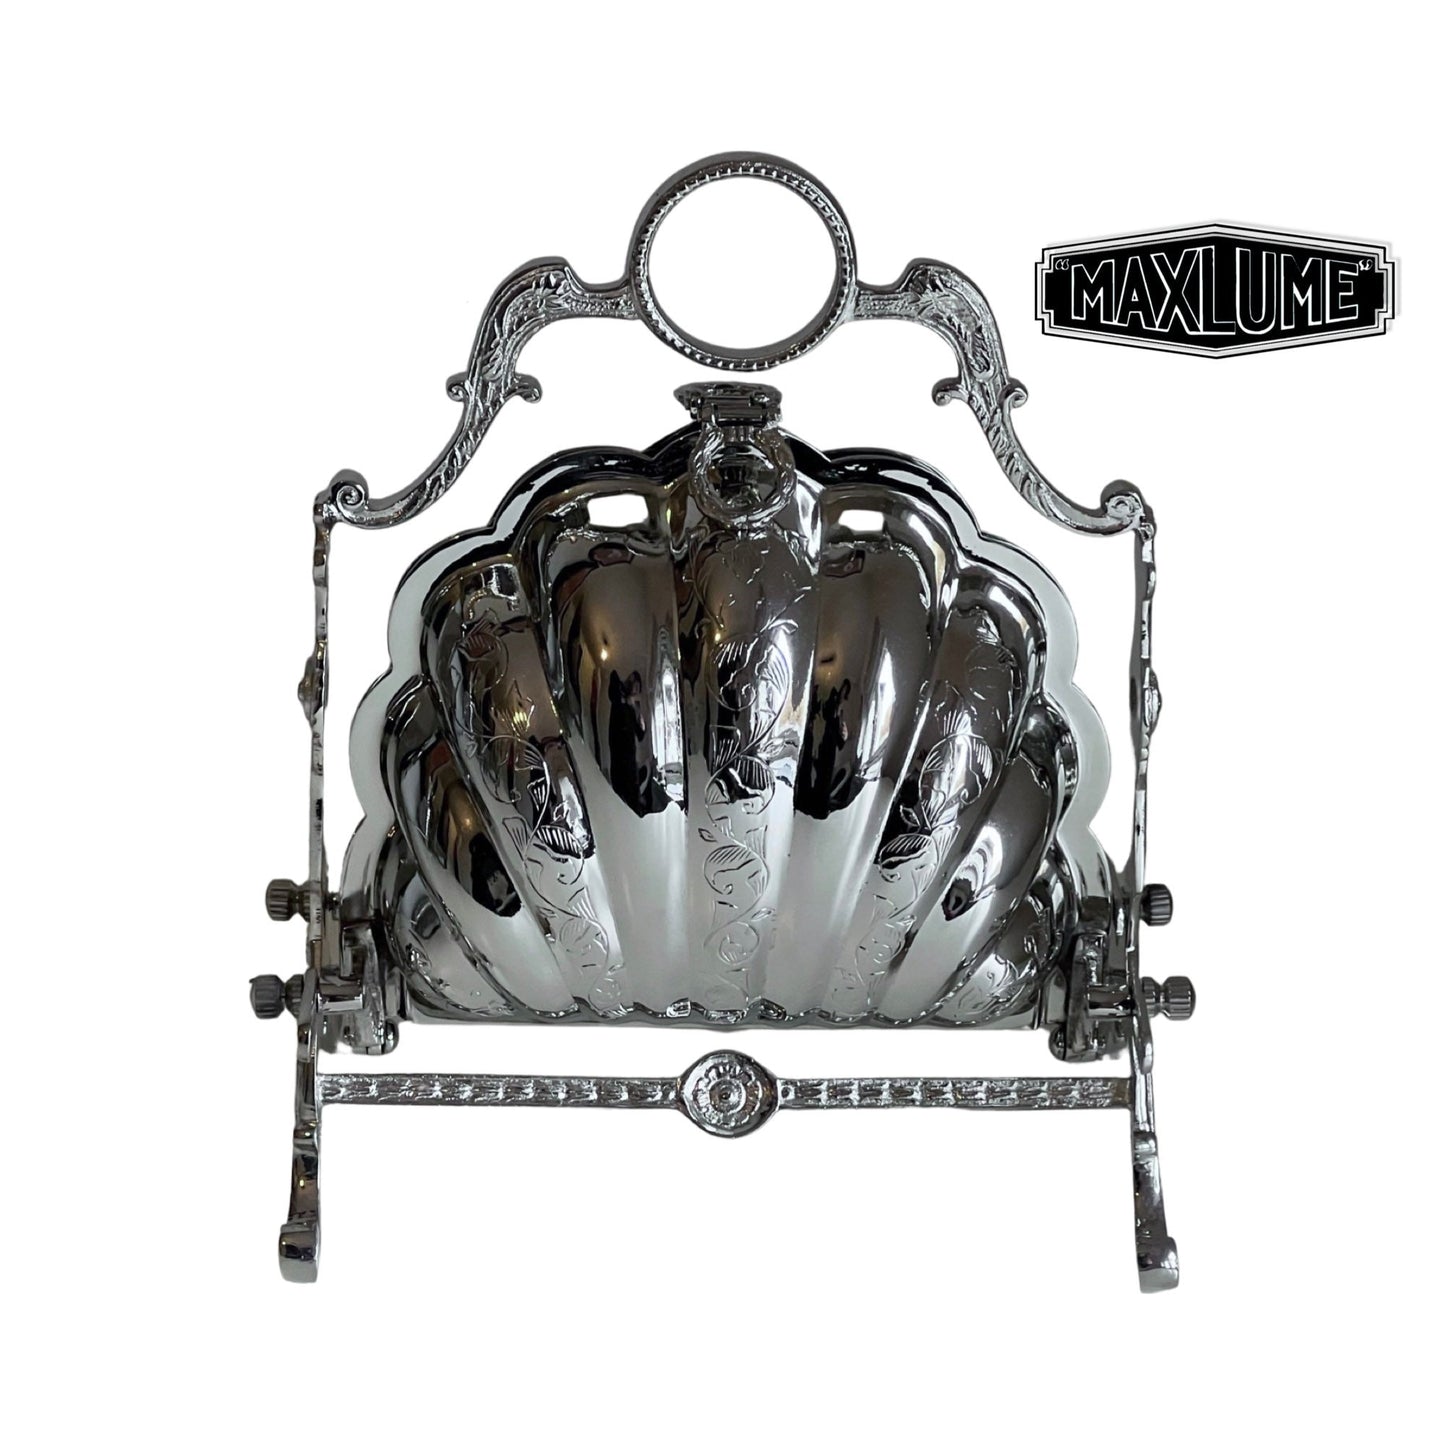 Maxlume ~ Solid Victorian Silver Finish Folding Biscuit Box Sweet Storage Ideal Nickel Plated